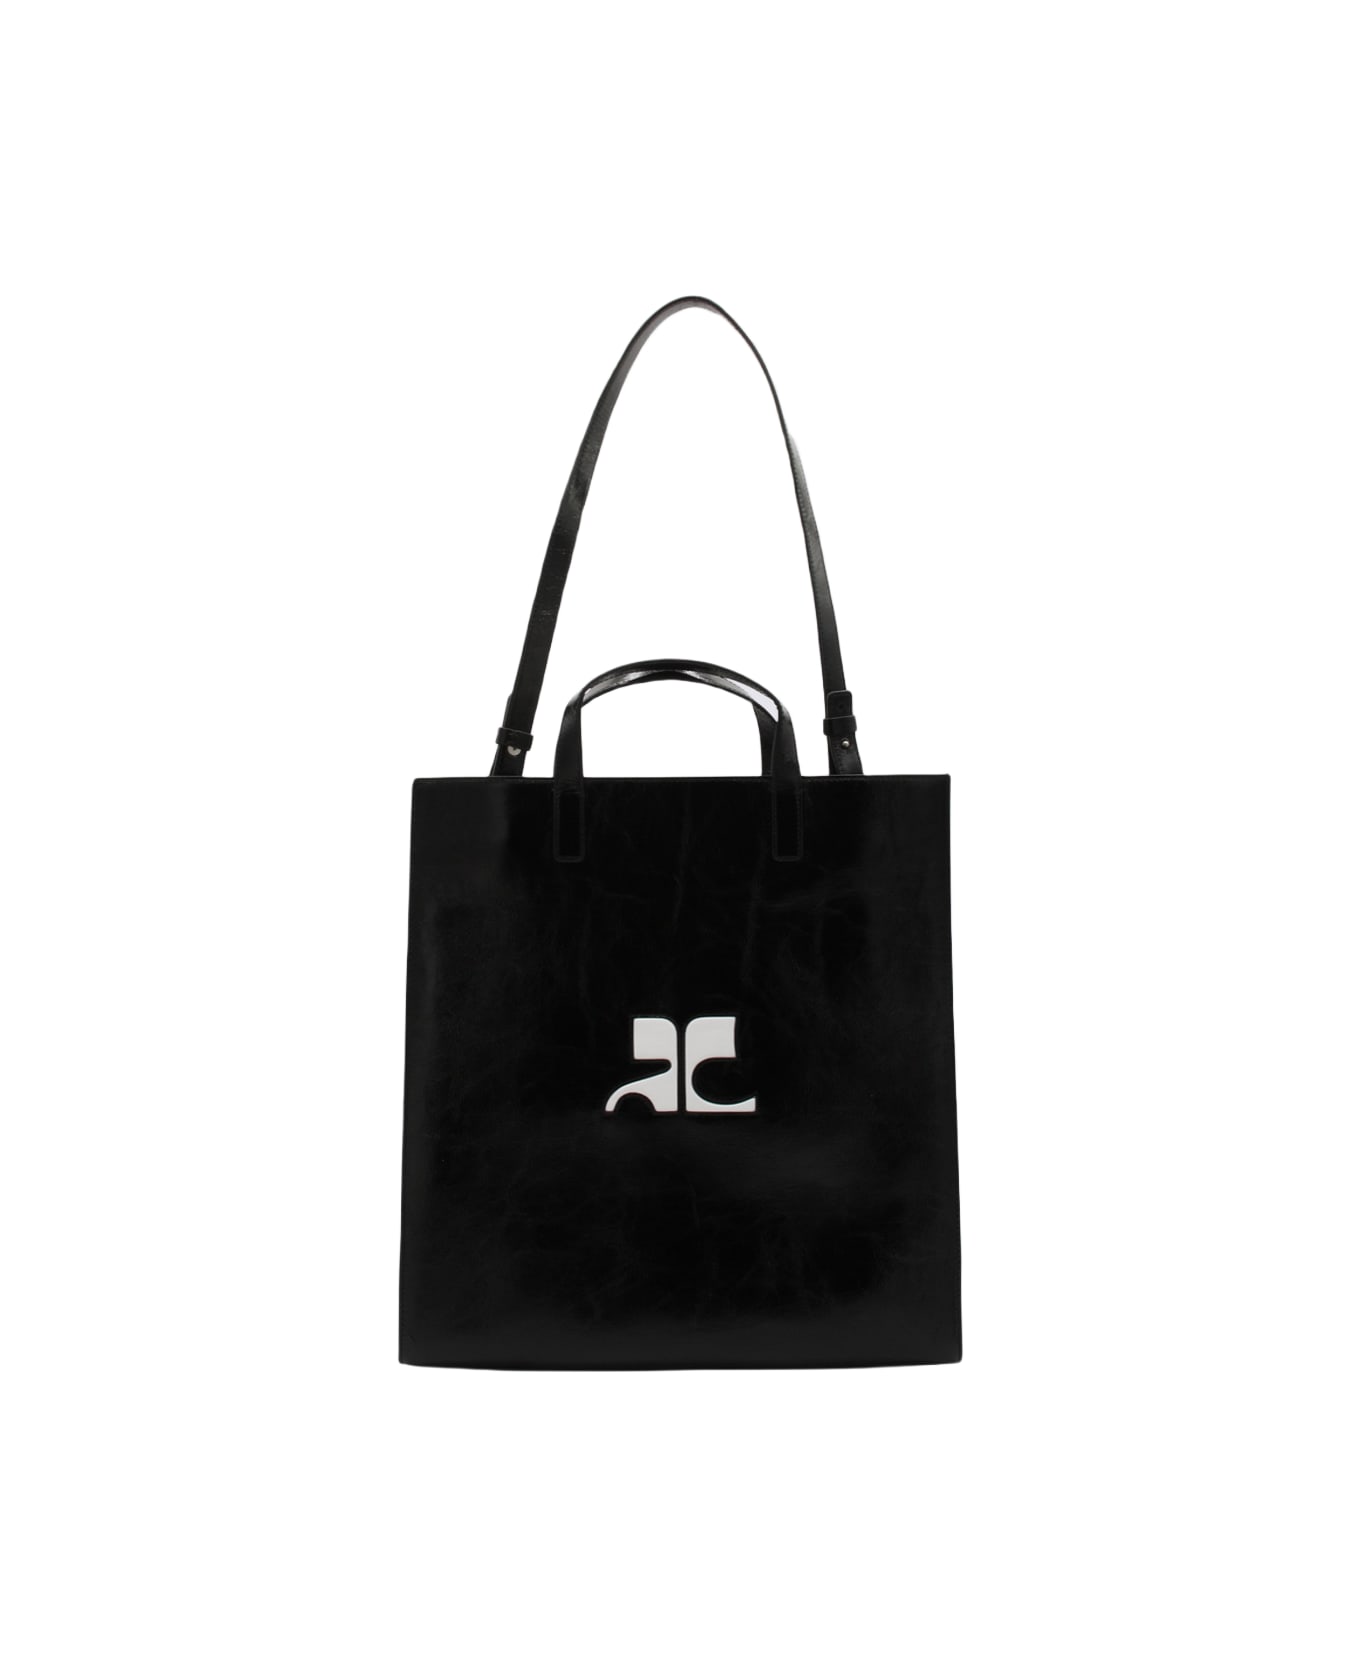 Courrèges Black And White Leather Handle Bag - Black トートバッグ